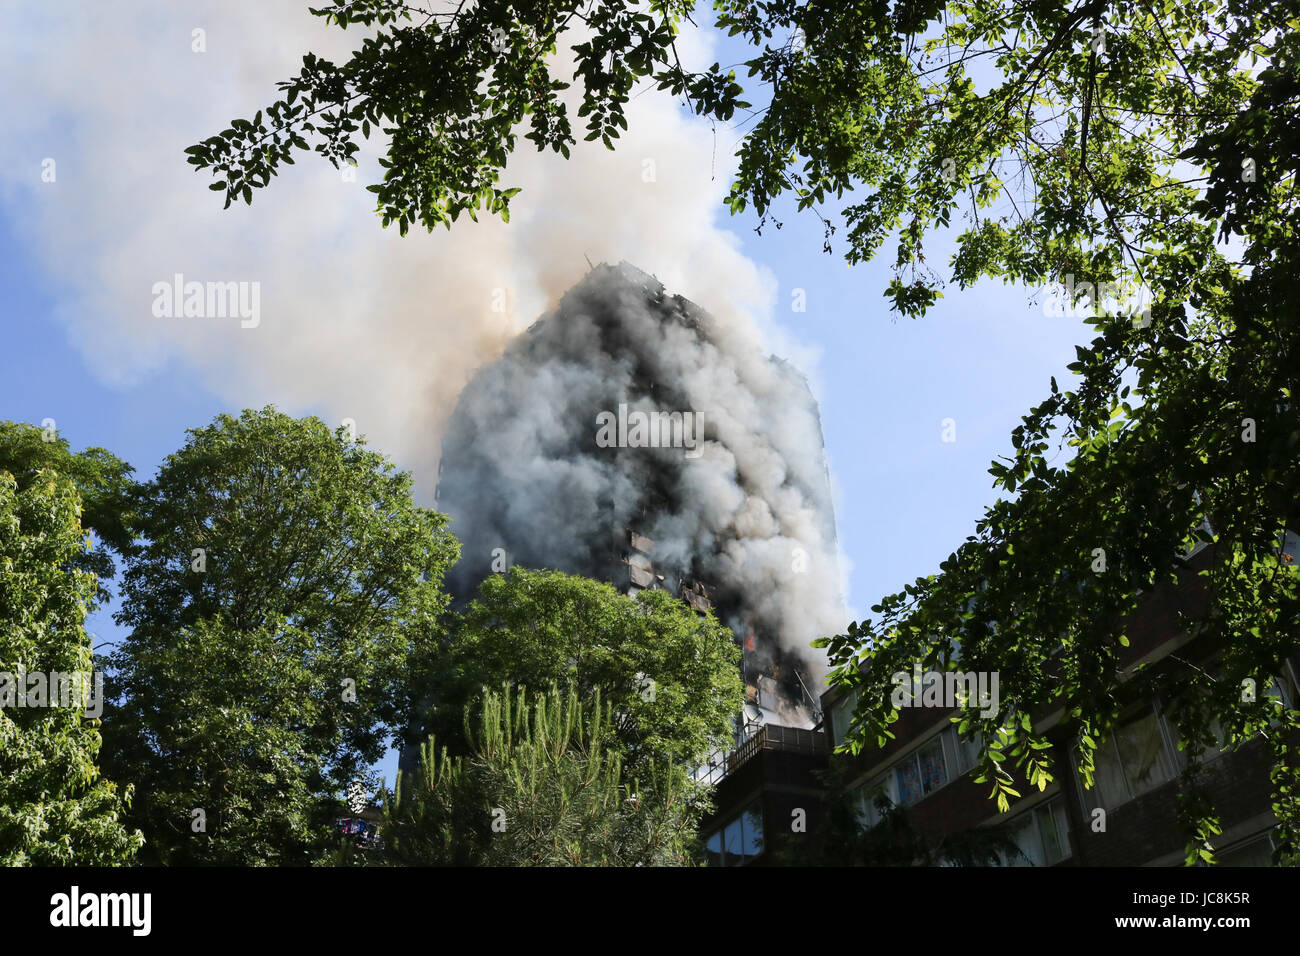 London, UK. 14th June, 2017. Grenfell Tower, A high rise residential block in Latimer road West London is engulfed by huge flames and smoke by a fire which started at nights as residents are evacuated. As yet there are no reports of casualties. Credit: amer ghazzal/Alamy Live News Stock Photo